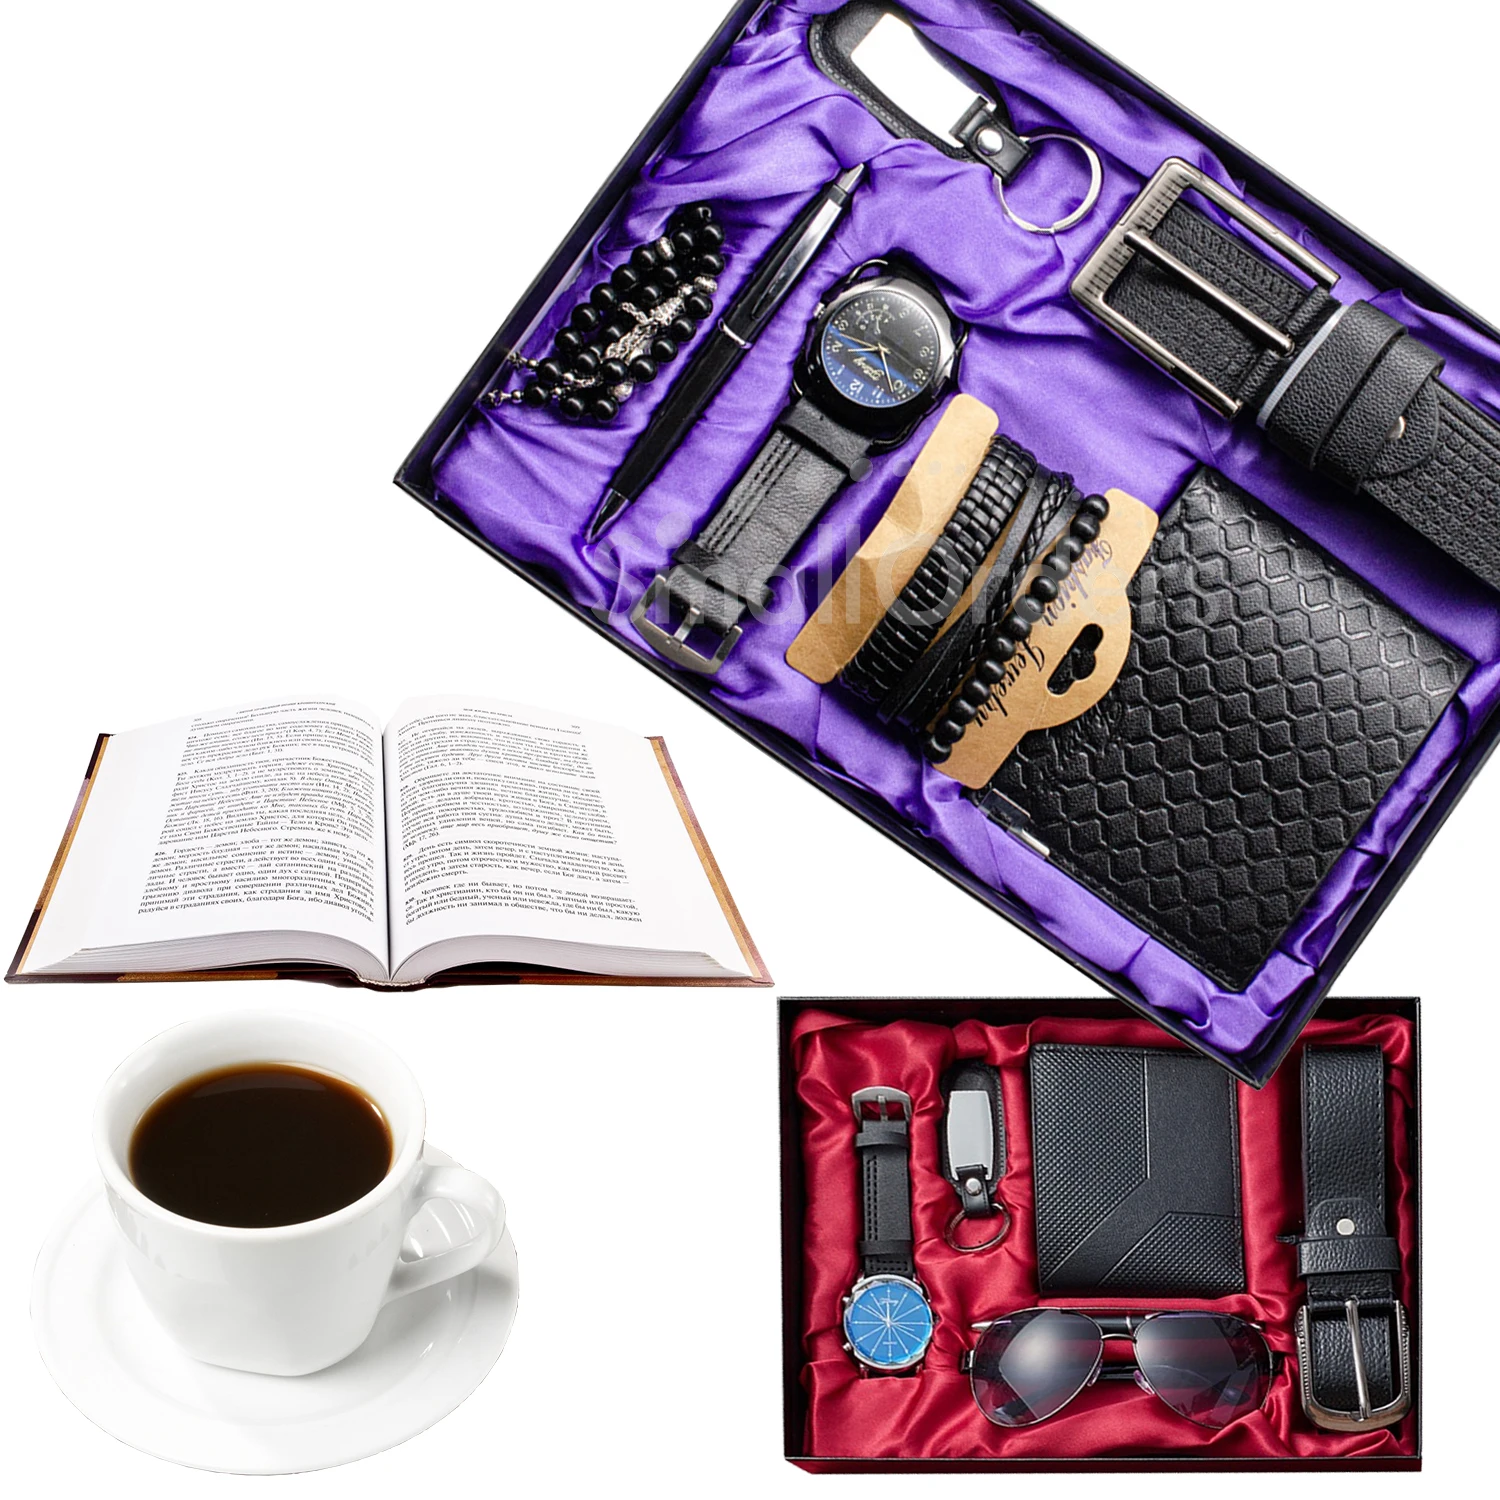 Custom luxury leather portfolio promotional corporate business gifts sets items for men novelties 2024 new products ideas 2024